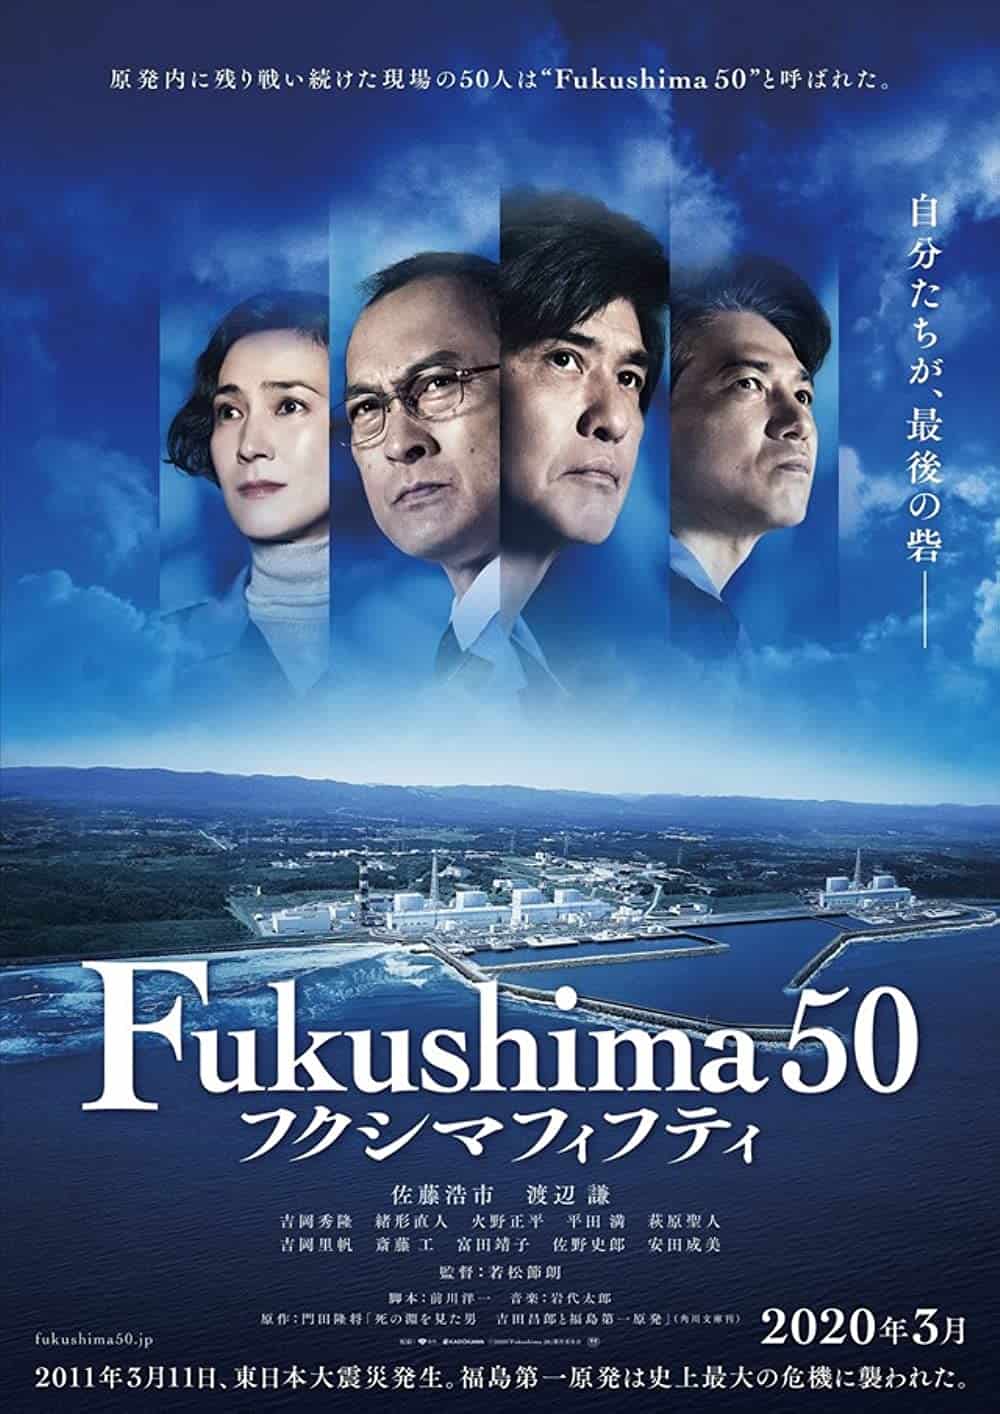 Fukushima 50 (2020) Best Tsunami Movies to Add in Your Watchlist